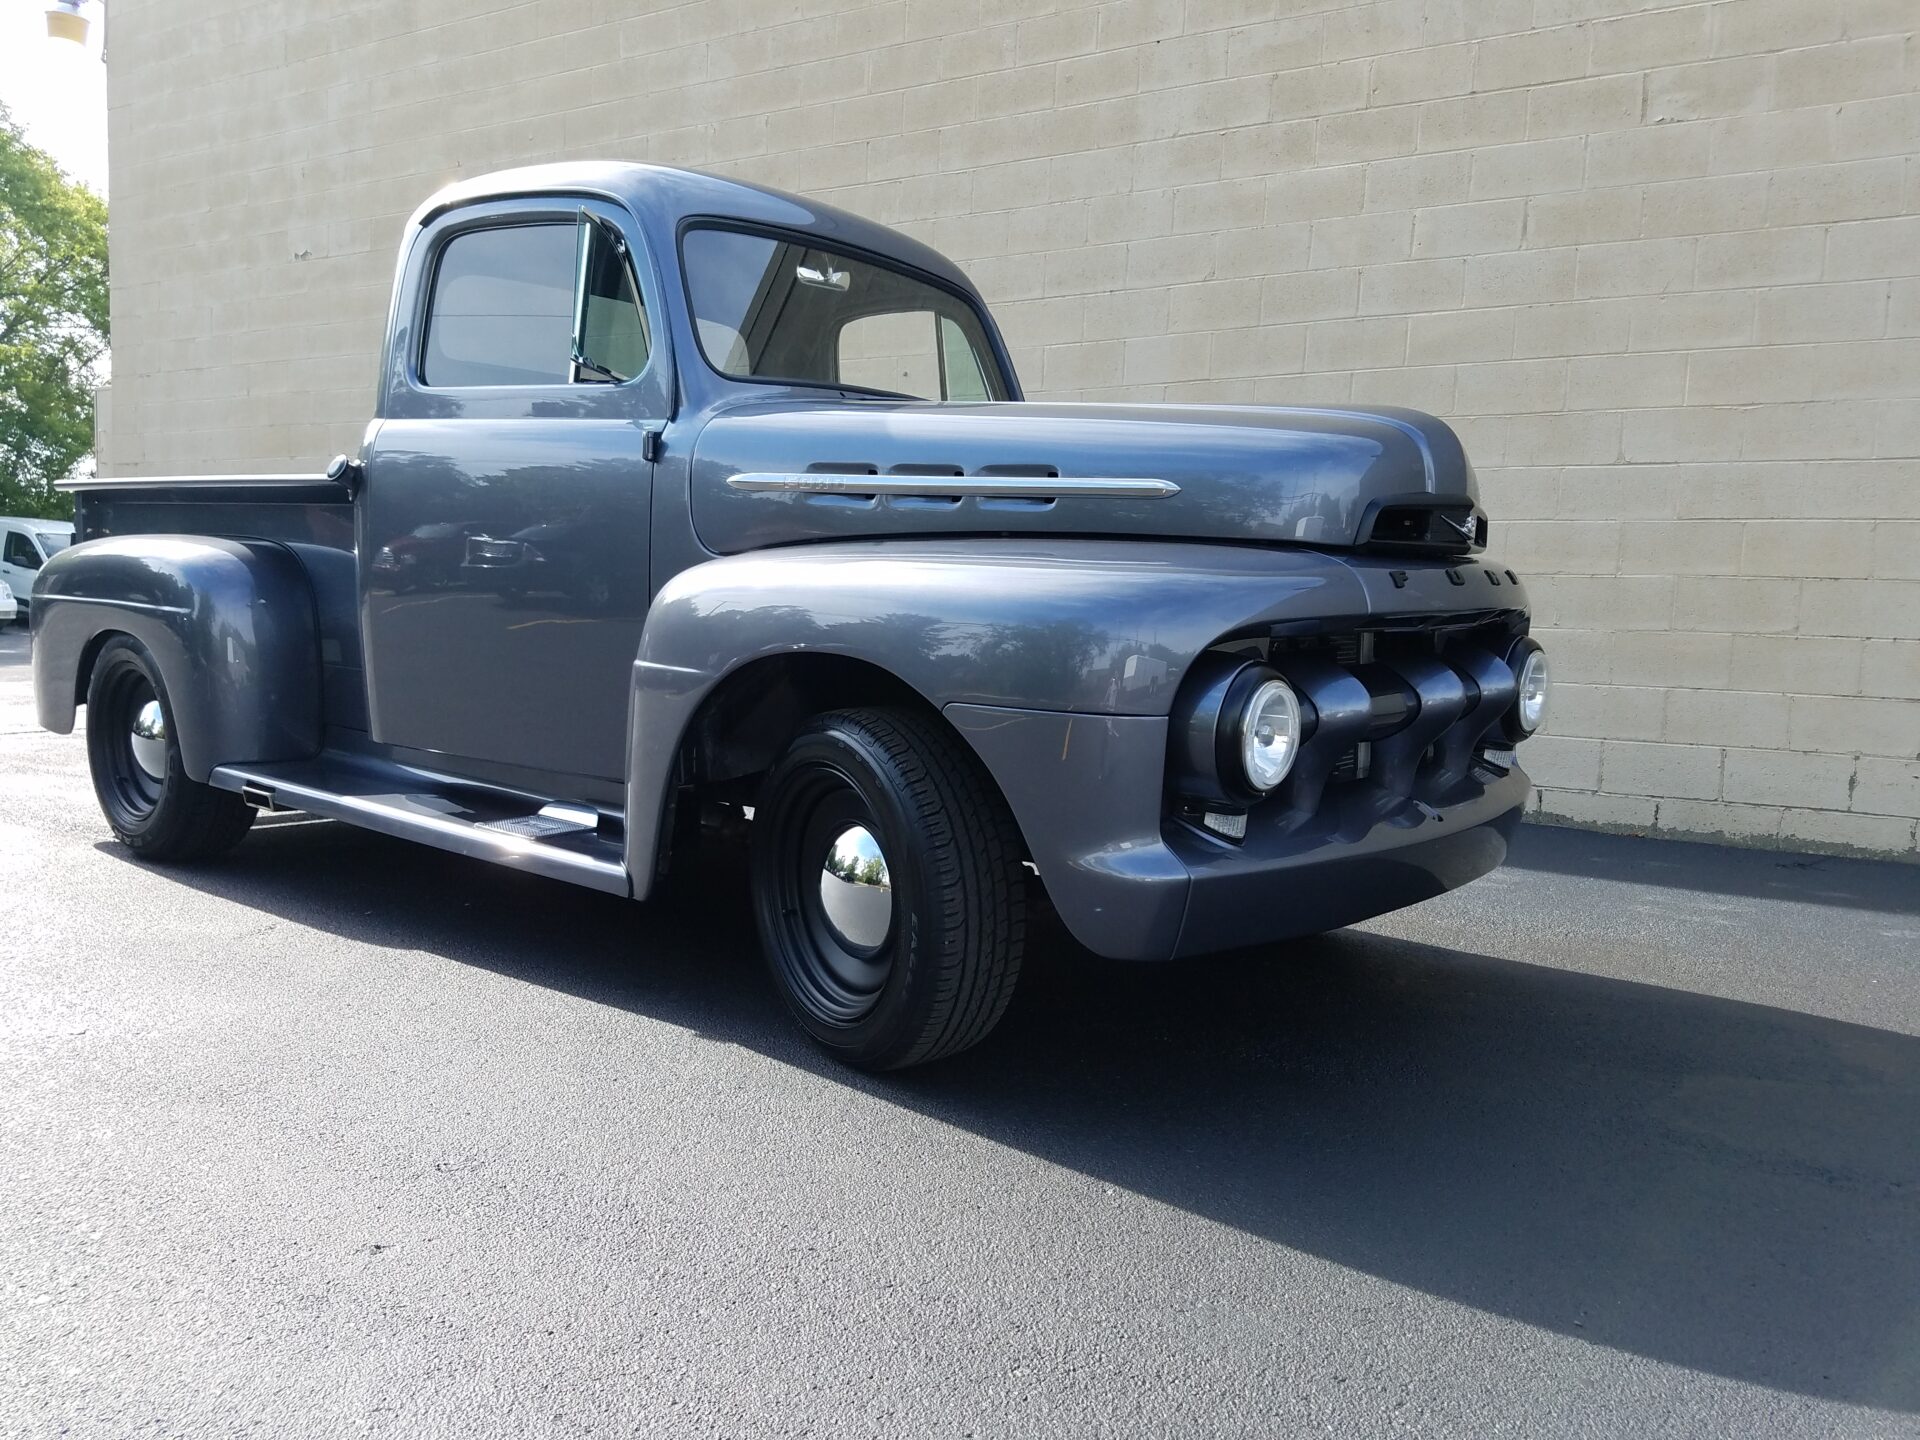 A completed 1952 Ford F100 model